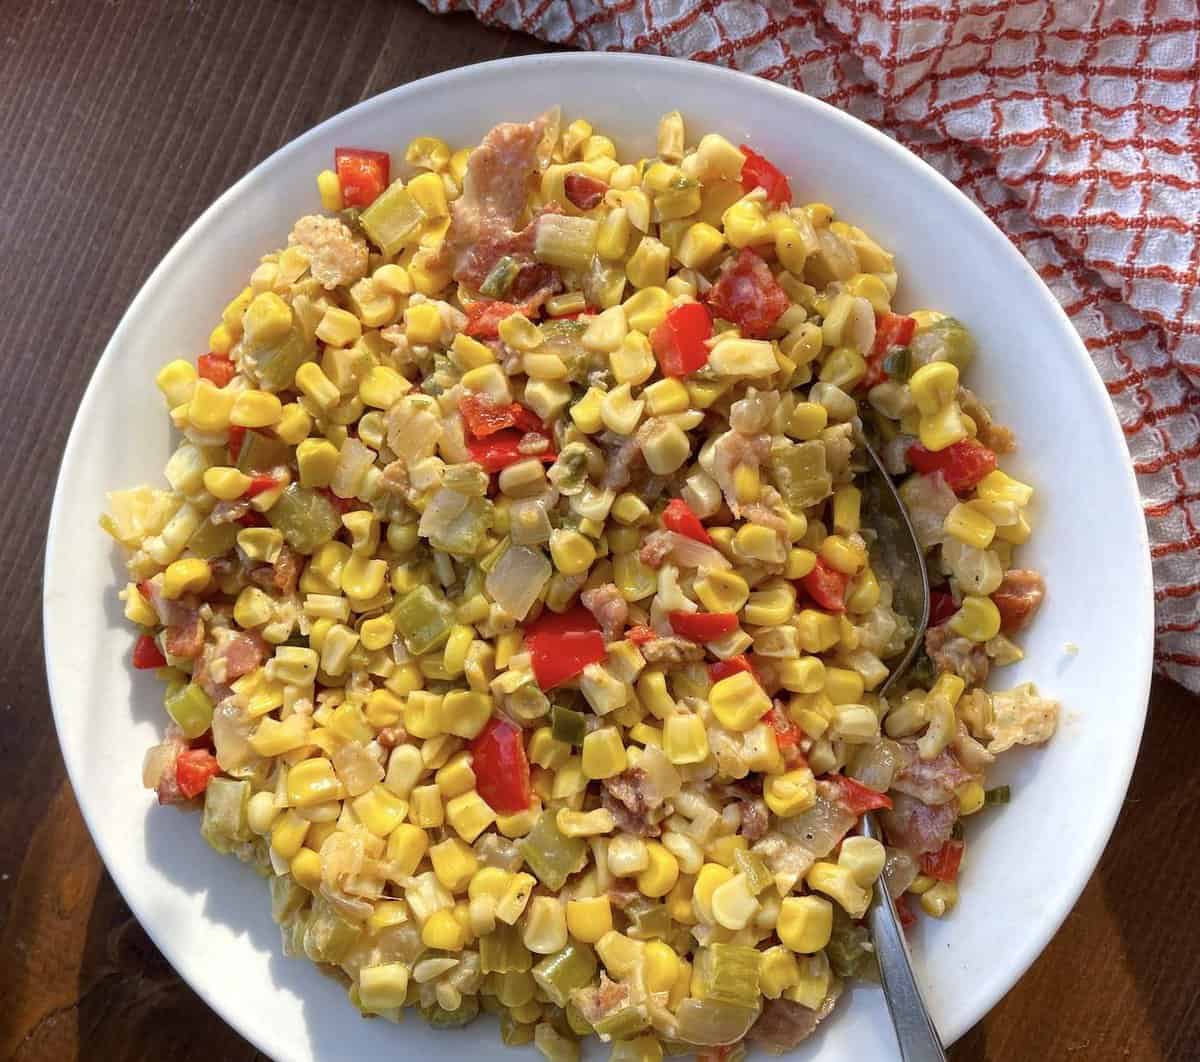 A bowl of corn maque choux with a silver spoon.